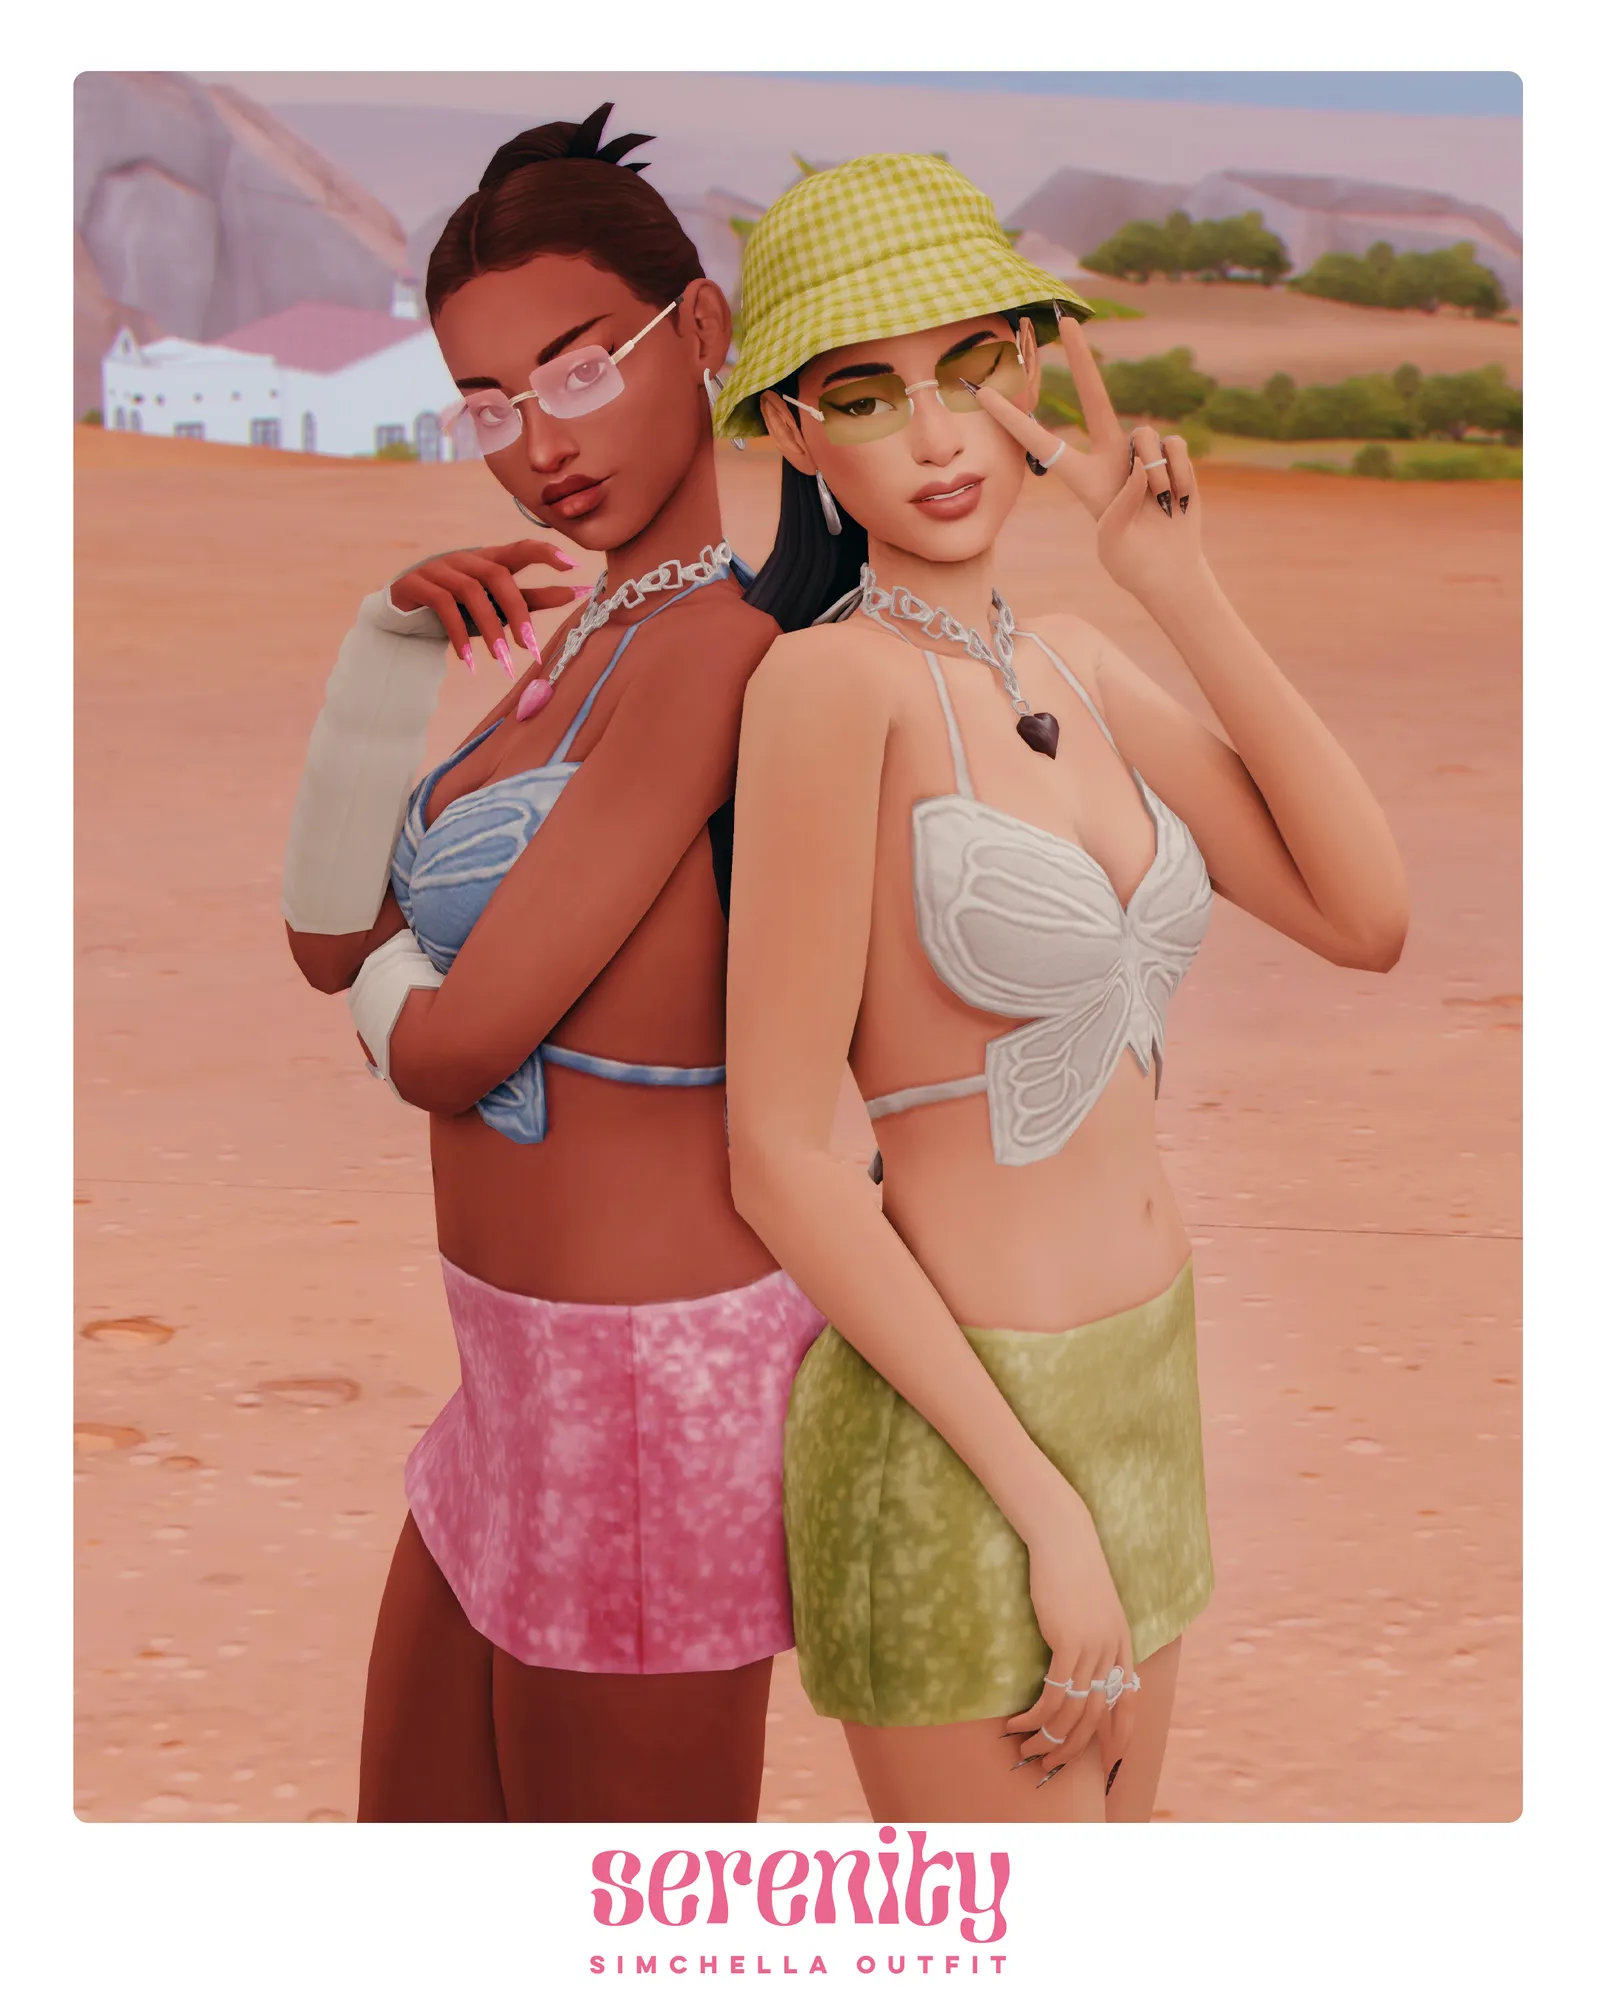 Simchella Outfit (5 items)